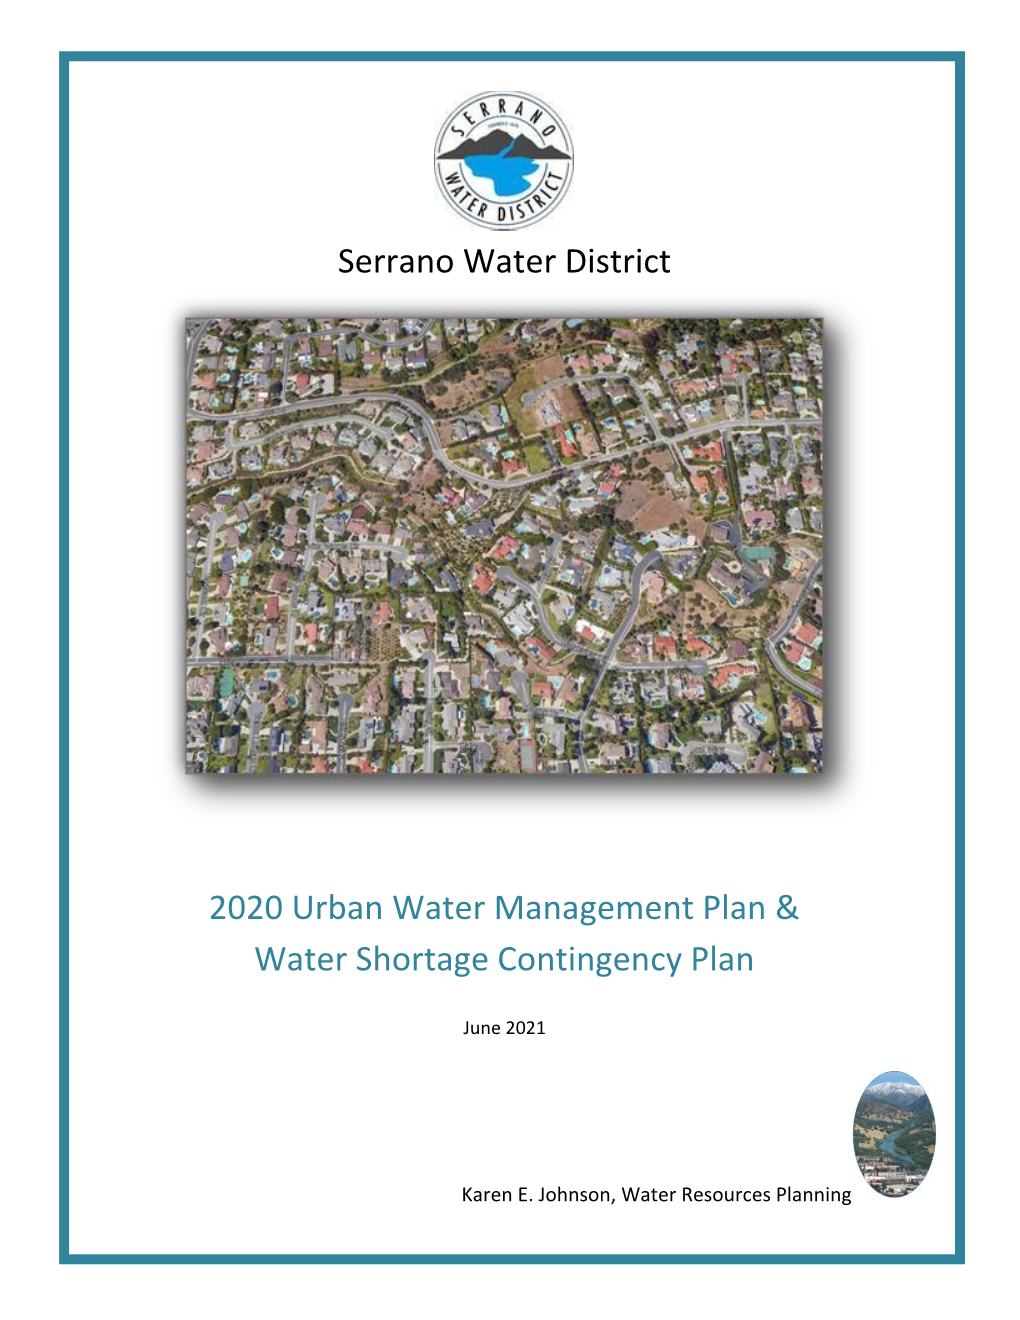 Urban Water Management Plan and Water Shortage Contingency Plan 2020